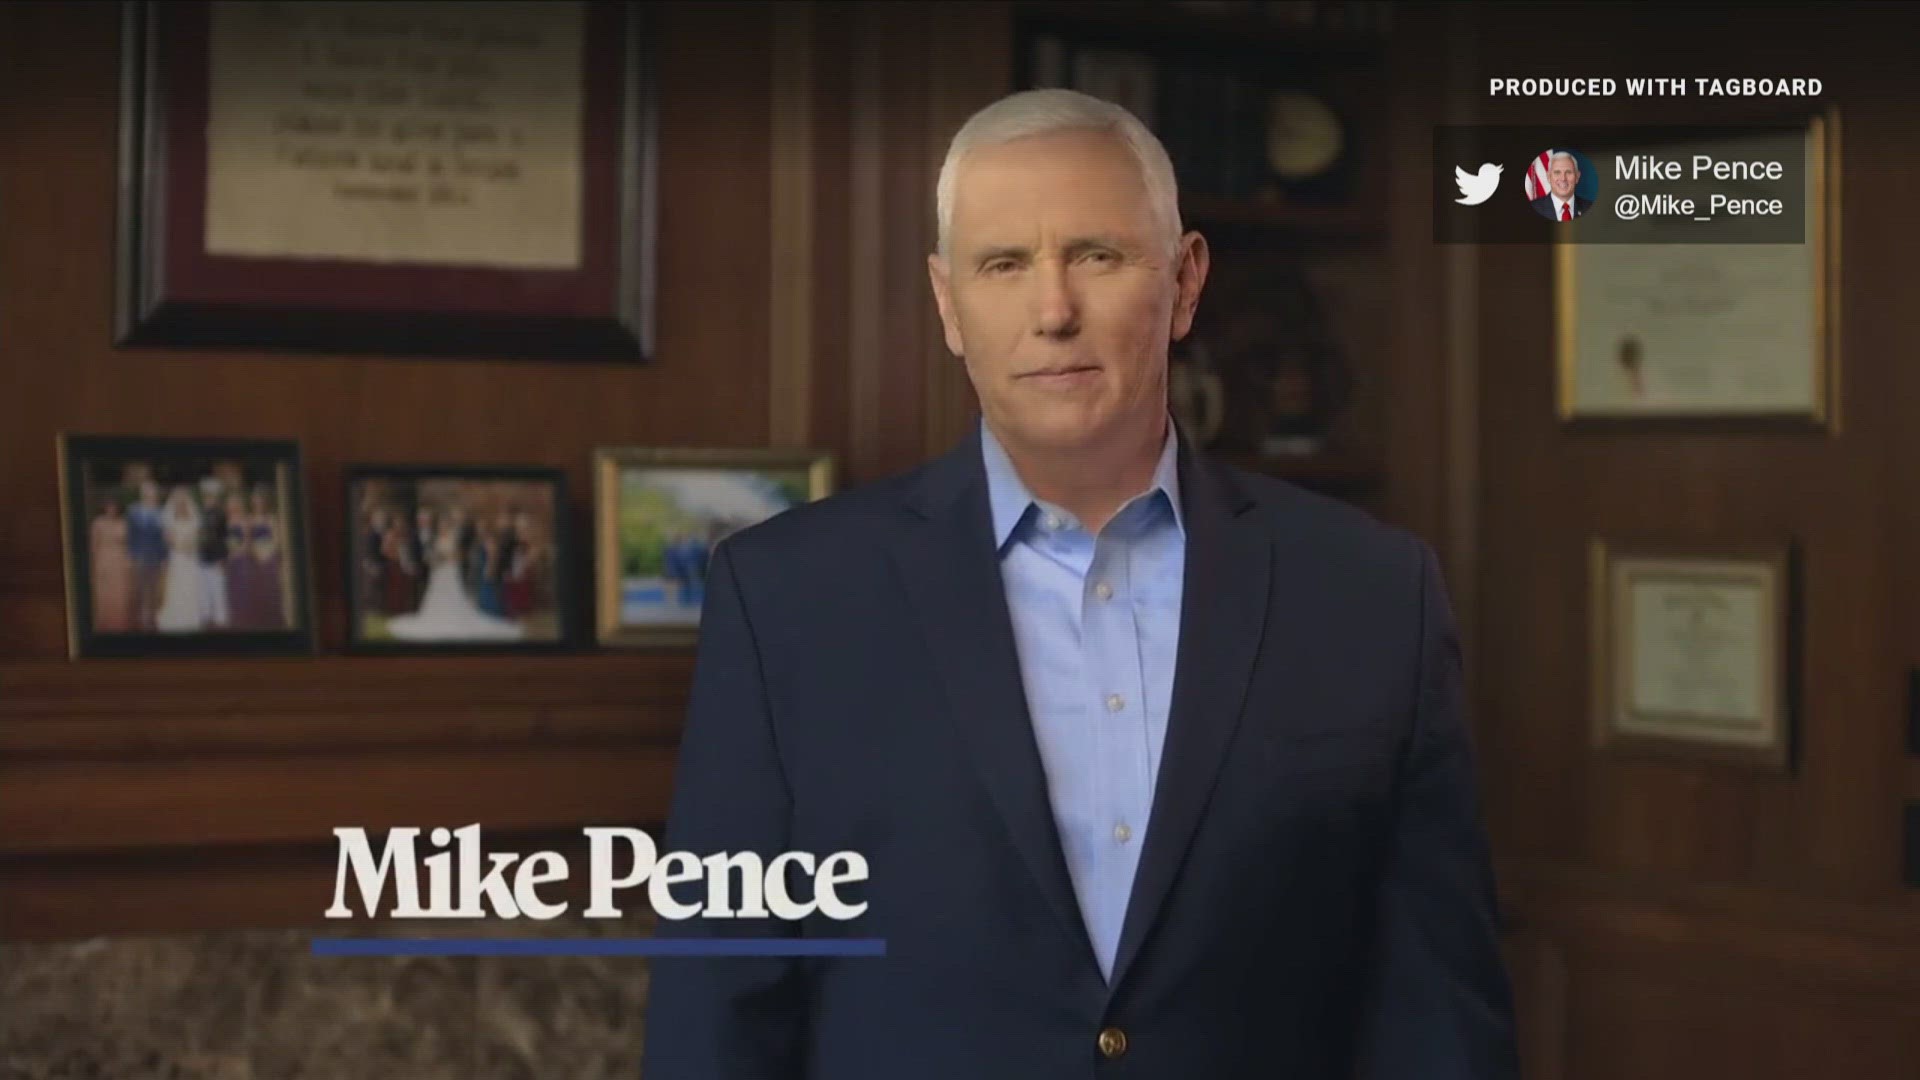 Former Vice President Mike Pence formally launching his campaign for the Republican nomination for president on Wednesday morning.